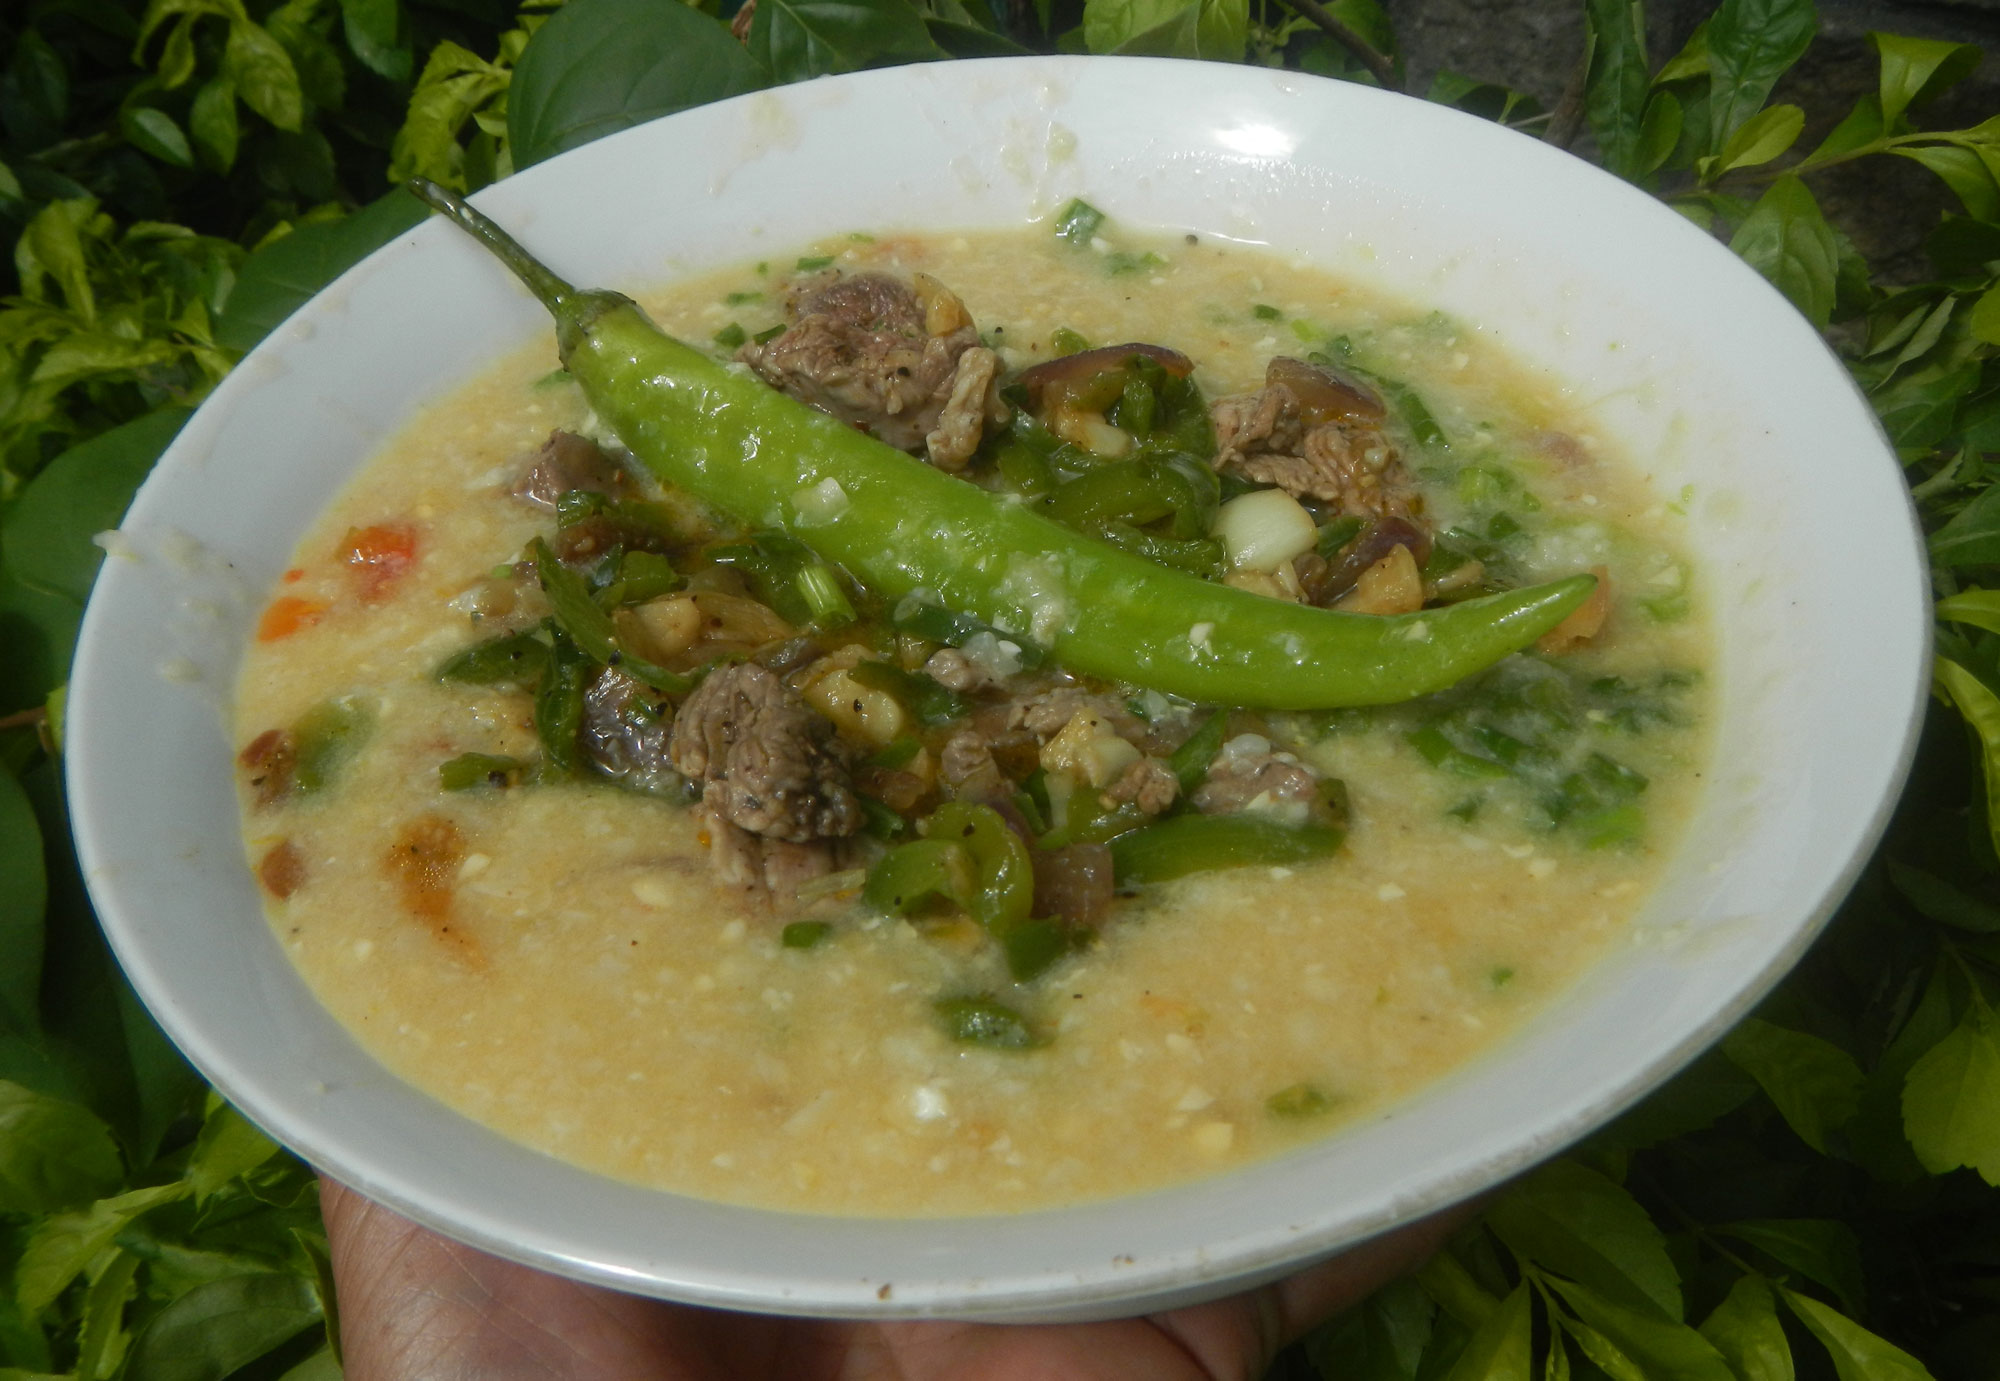 Photograph of a stir fry with waxy corn. The photo shows a yellowish porridge of waxy corn with beef and green peppers in the center and an elongated green pepper (perhaps a hot pepper) sitting on top.